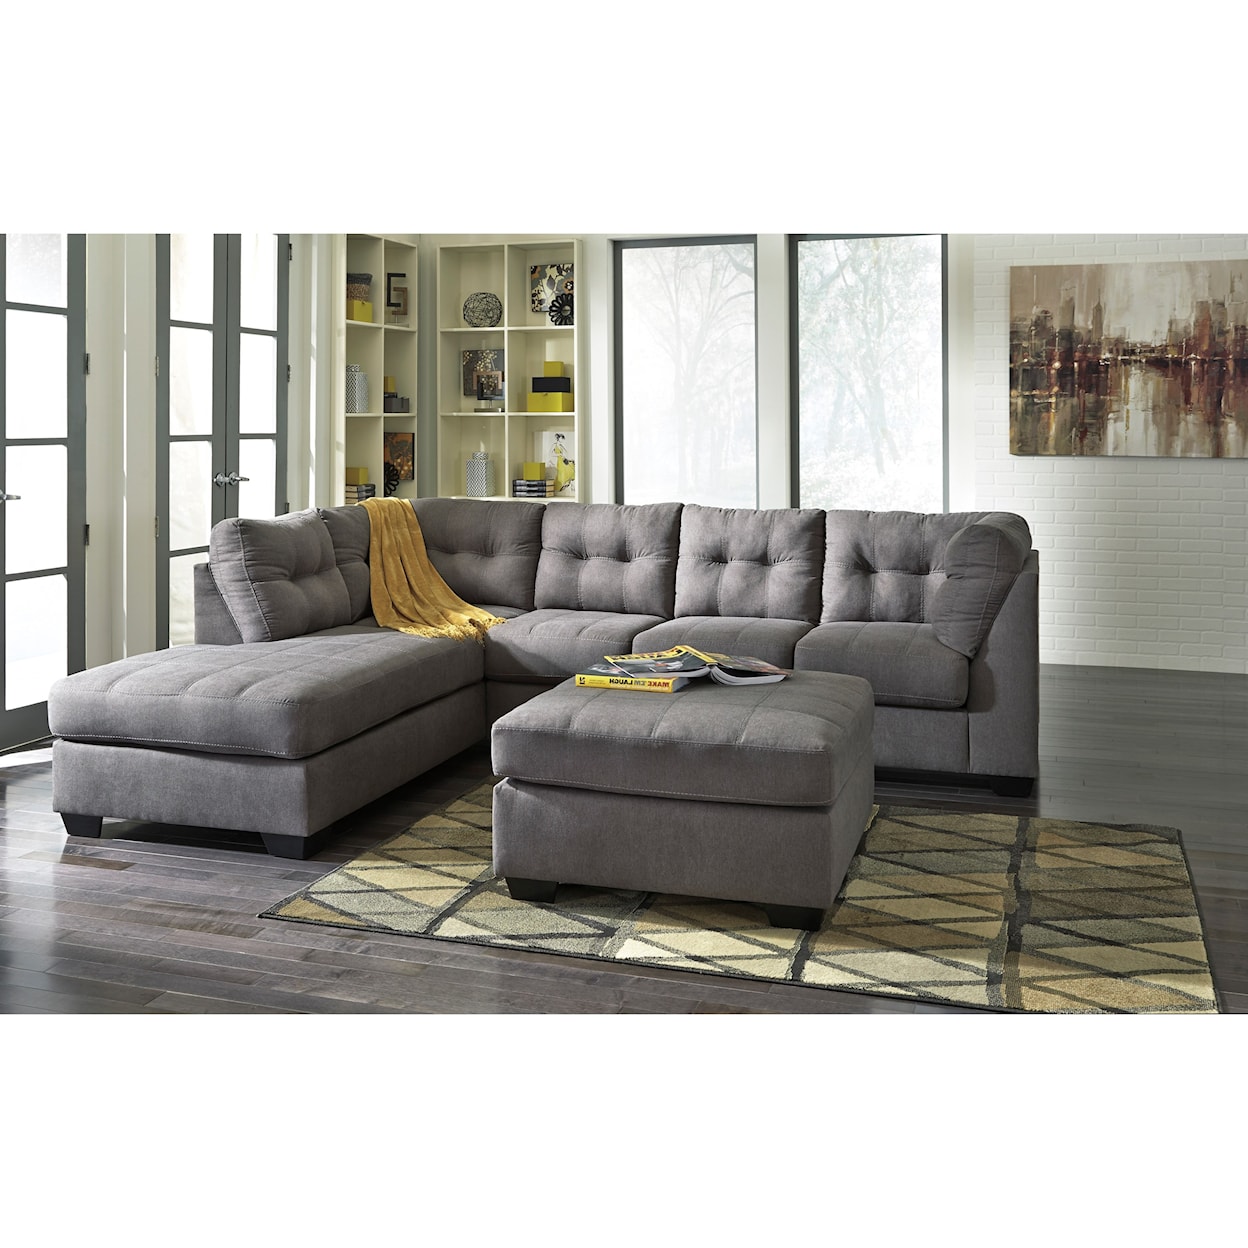 Ashley Furniture Benchcraft Maier Oversized Accent Ottoman